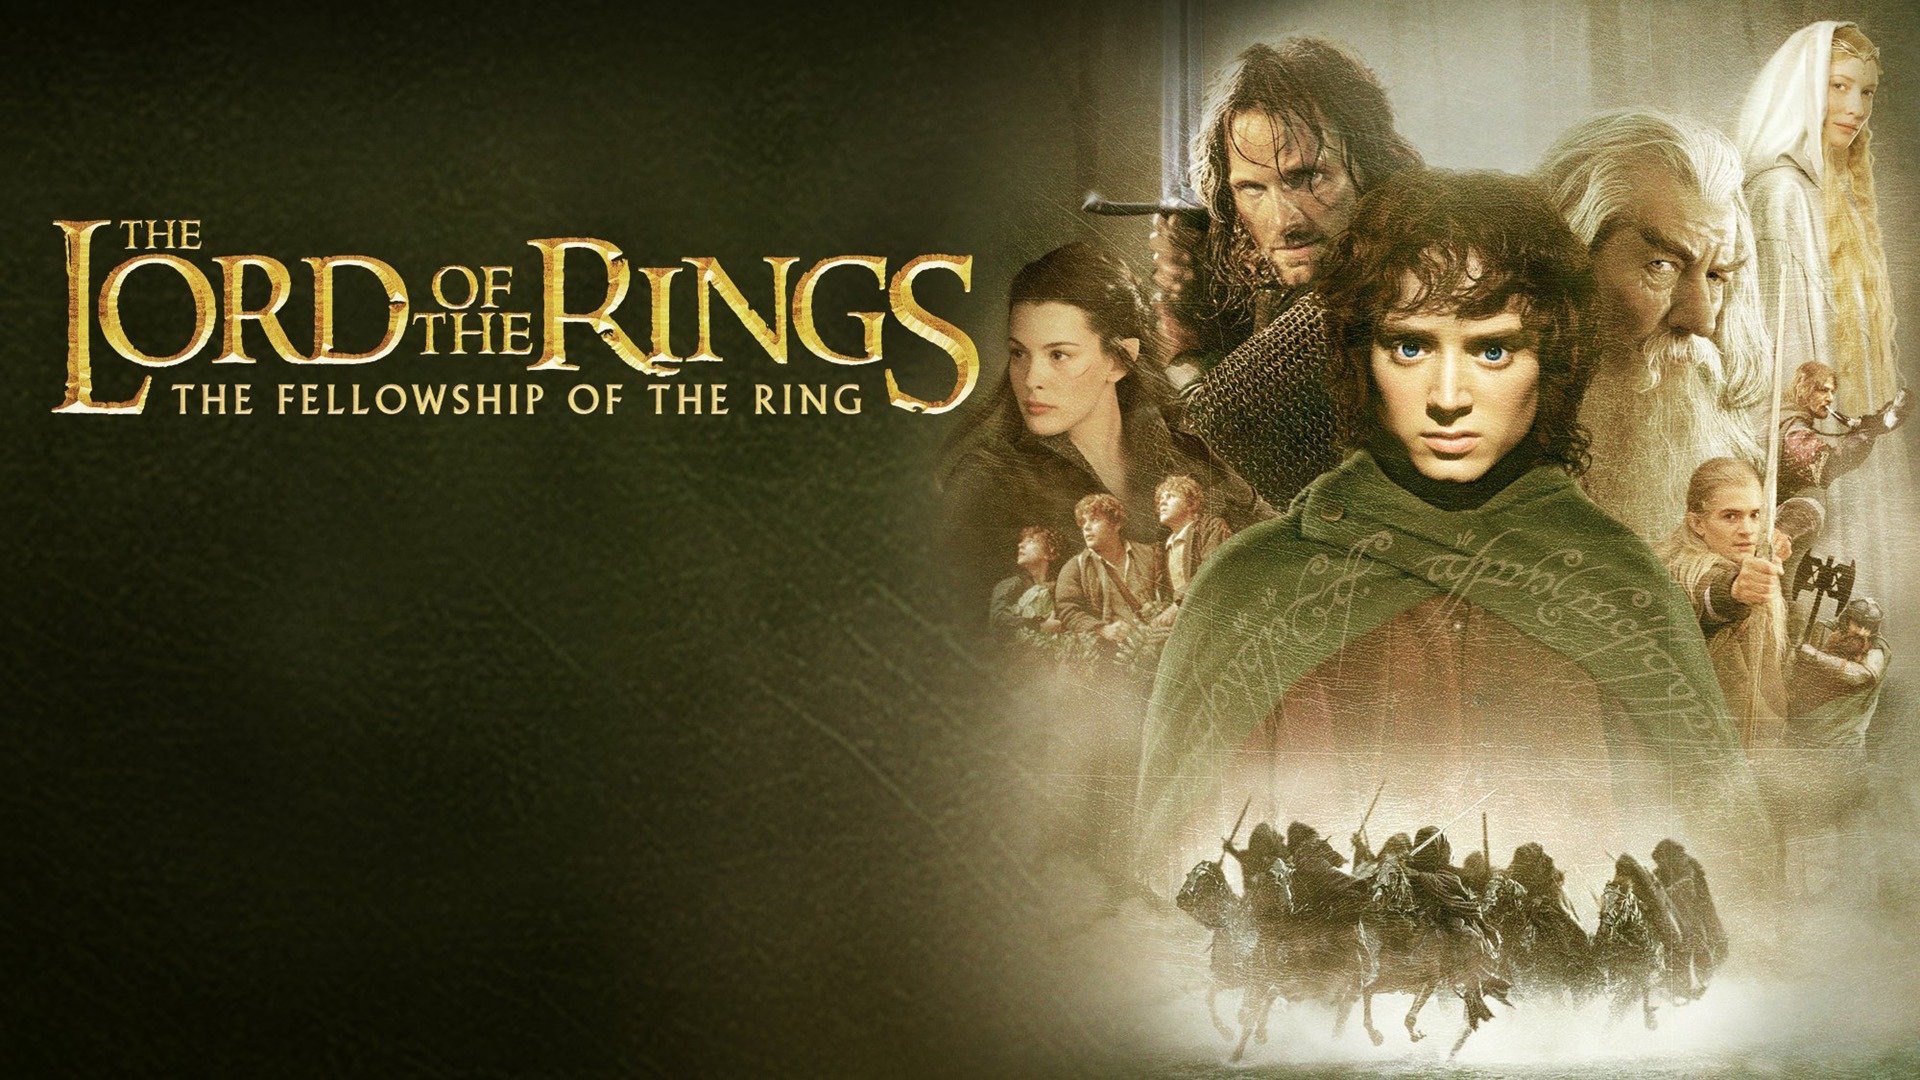 download the new version for apple The Lord of the Rings: The Fellowship…